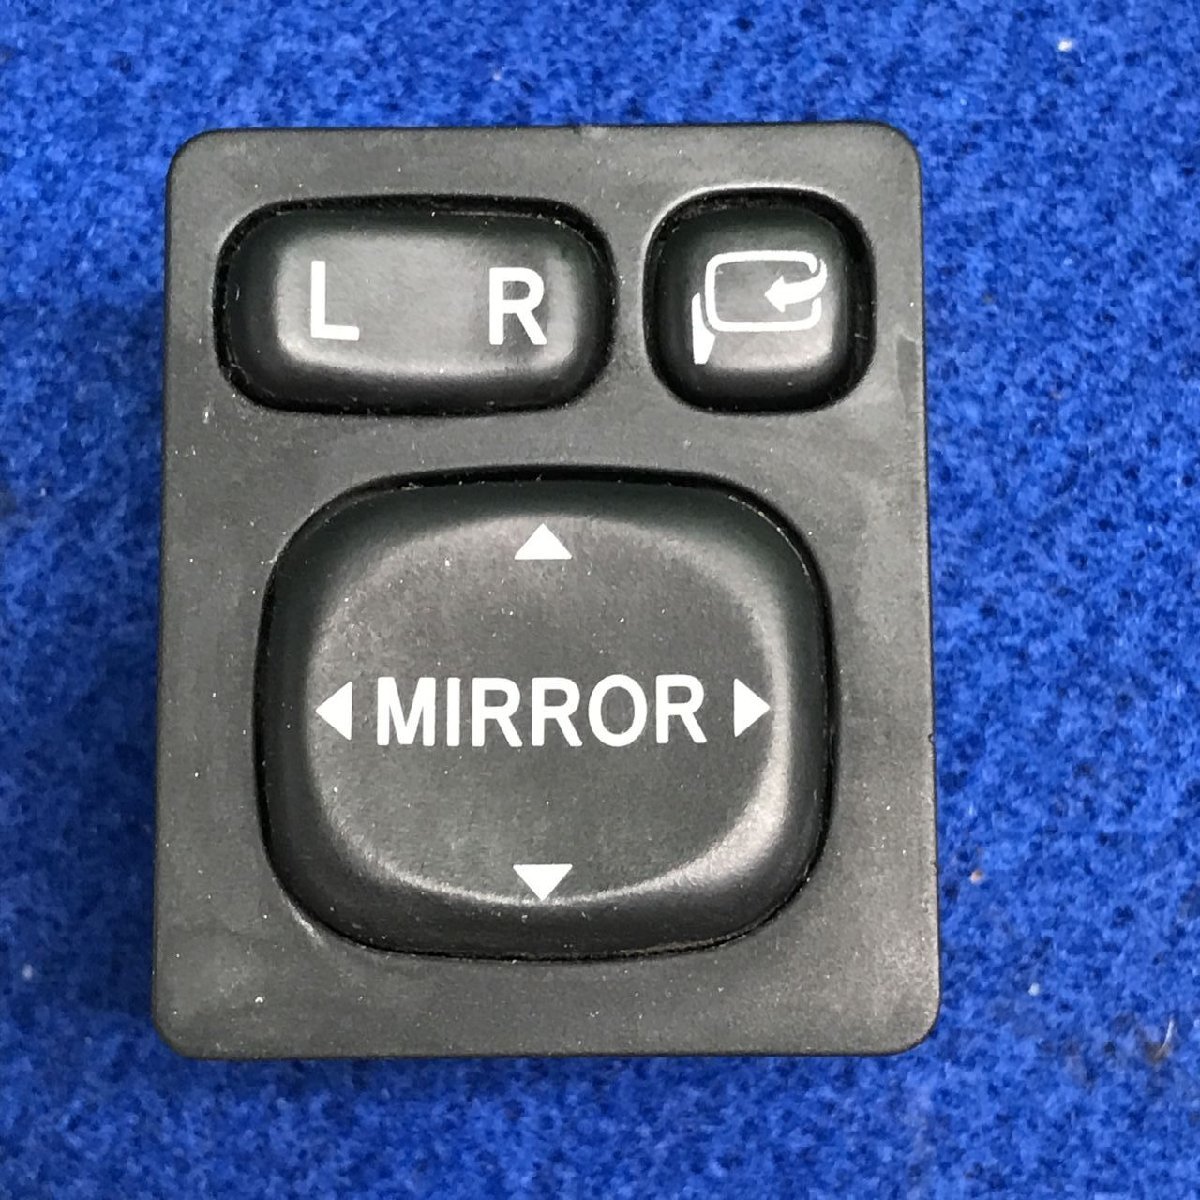 S331V Hijet Cargo original door mirror switch 1A3-8-5|22A1572* including in a package un- possible *